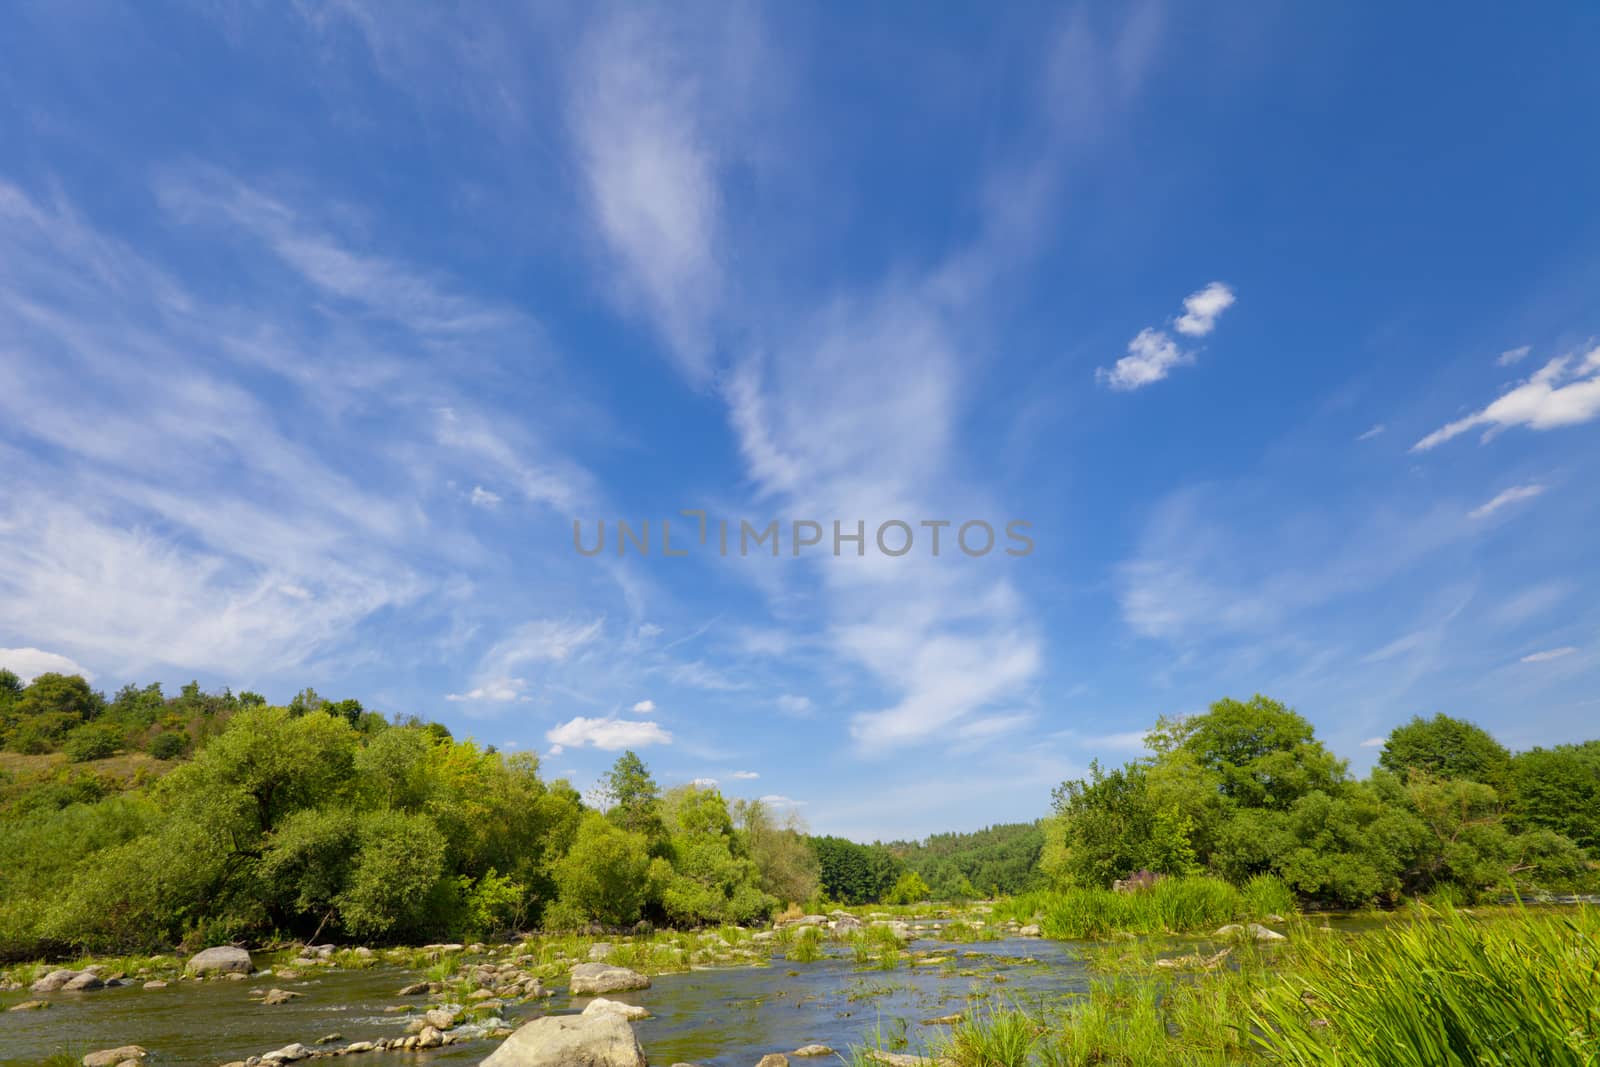 Bue sky with clouds over river. Nature in vibrant color